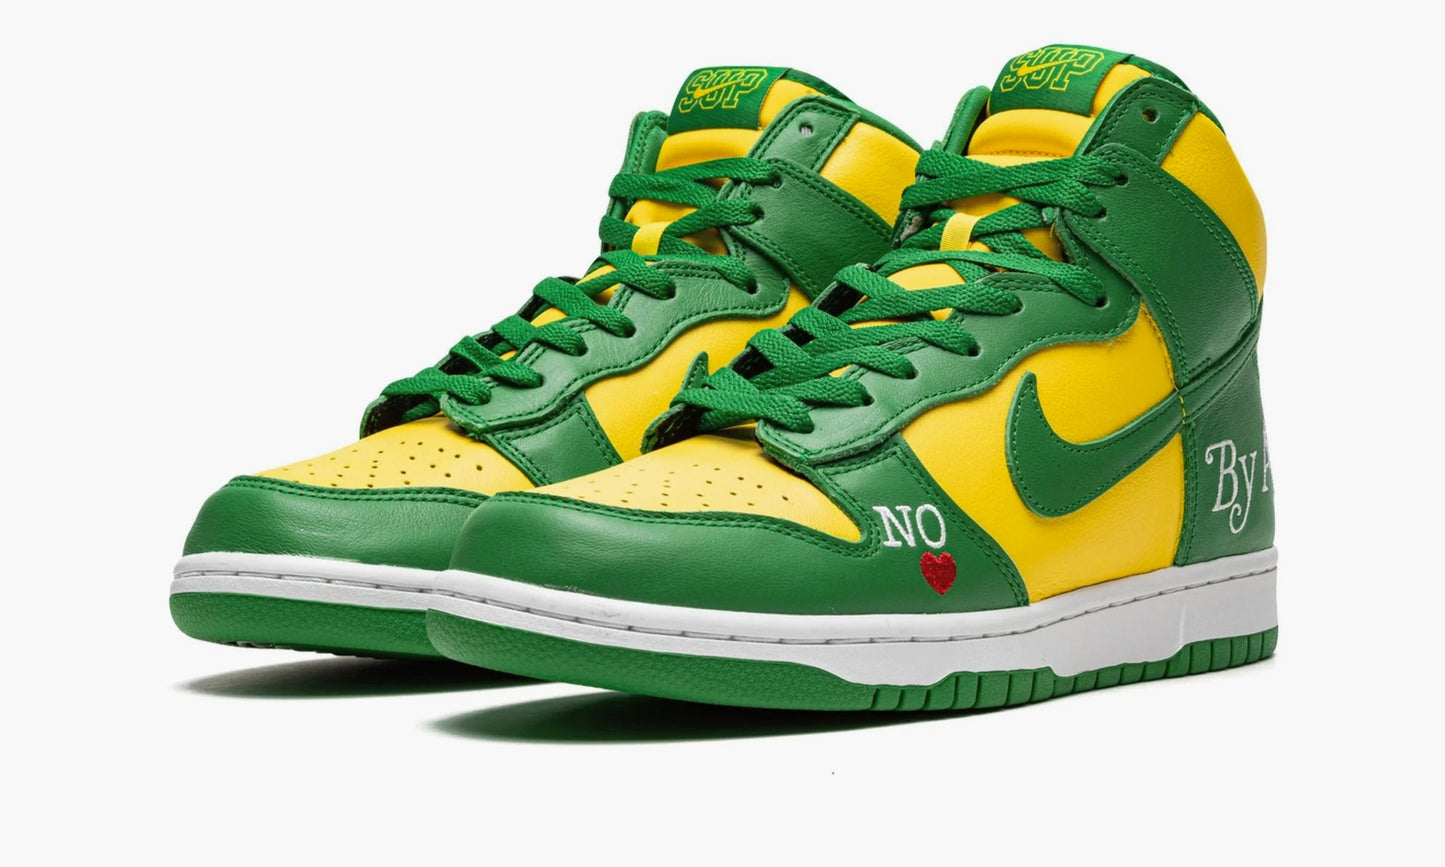 Nike Dunk SB High “Supreme By Any Means Brazil” - DN3741 700 | Grailshop